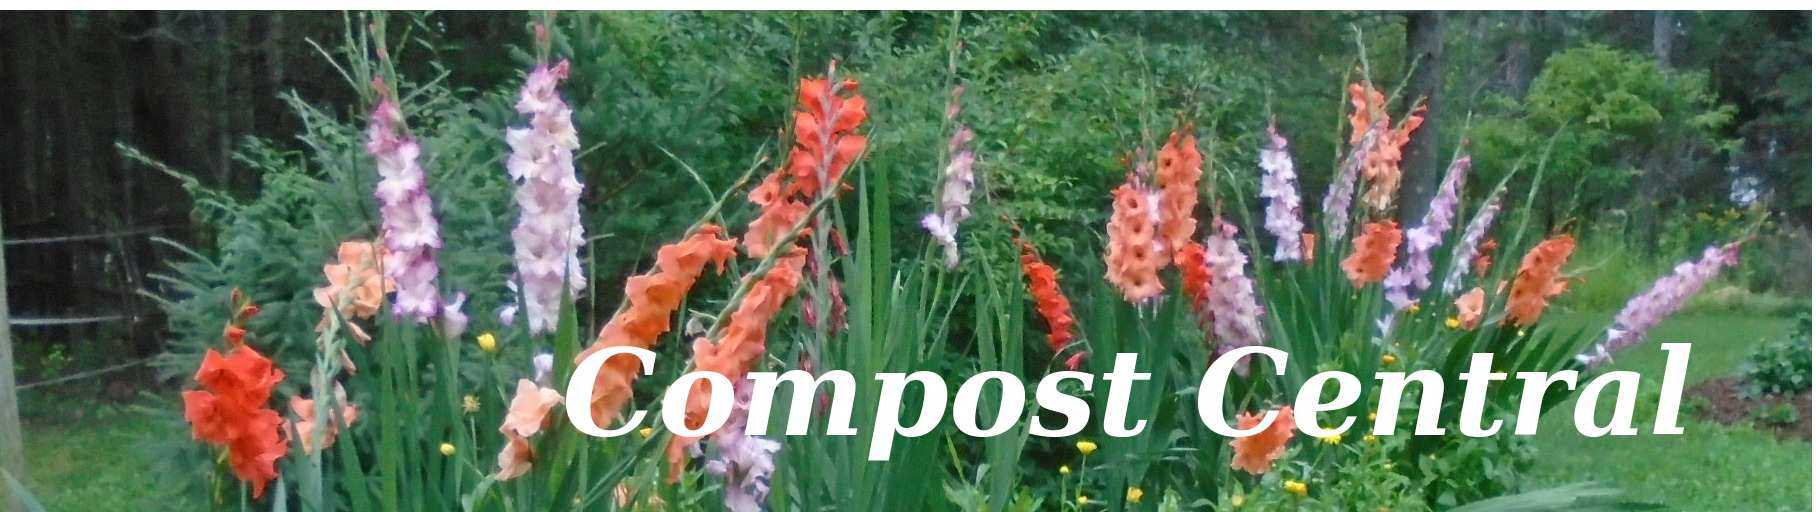 logo image for compost central